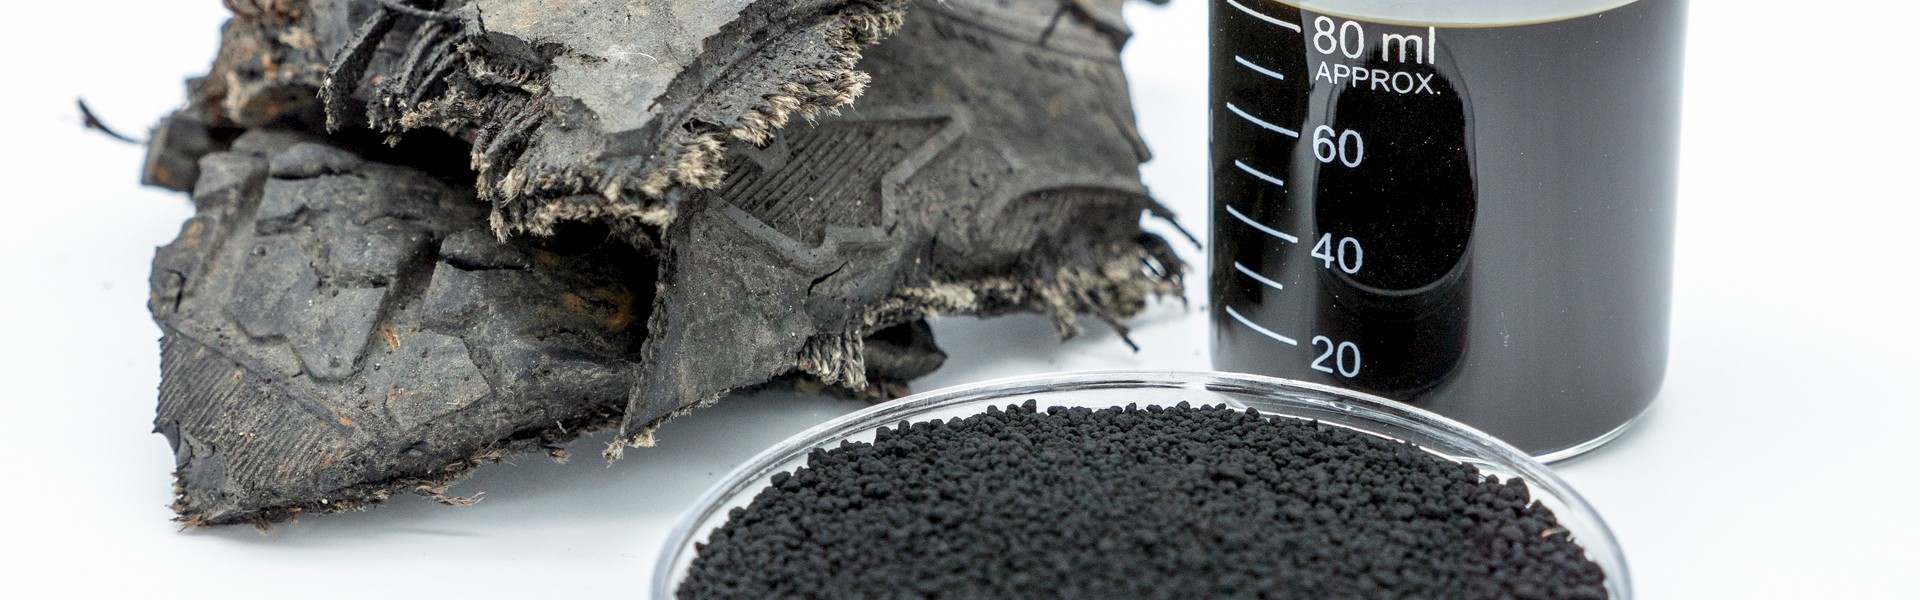 We are leaders in converting scrap tires into high grade fuel oil and recovered carbon black.